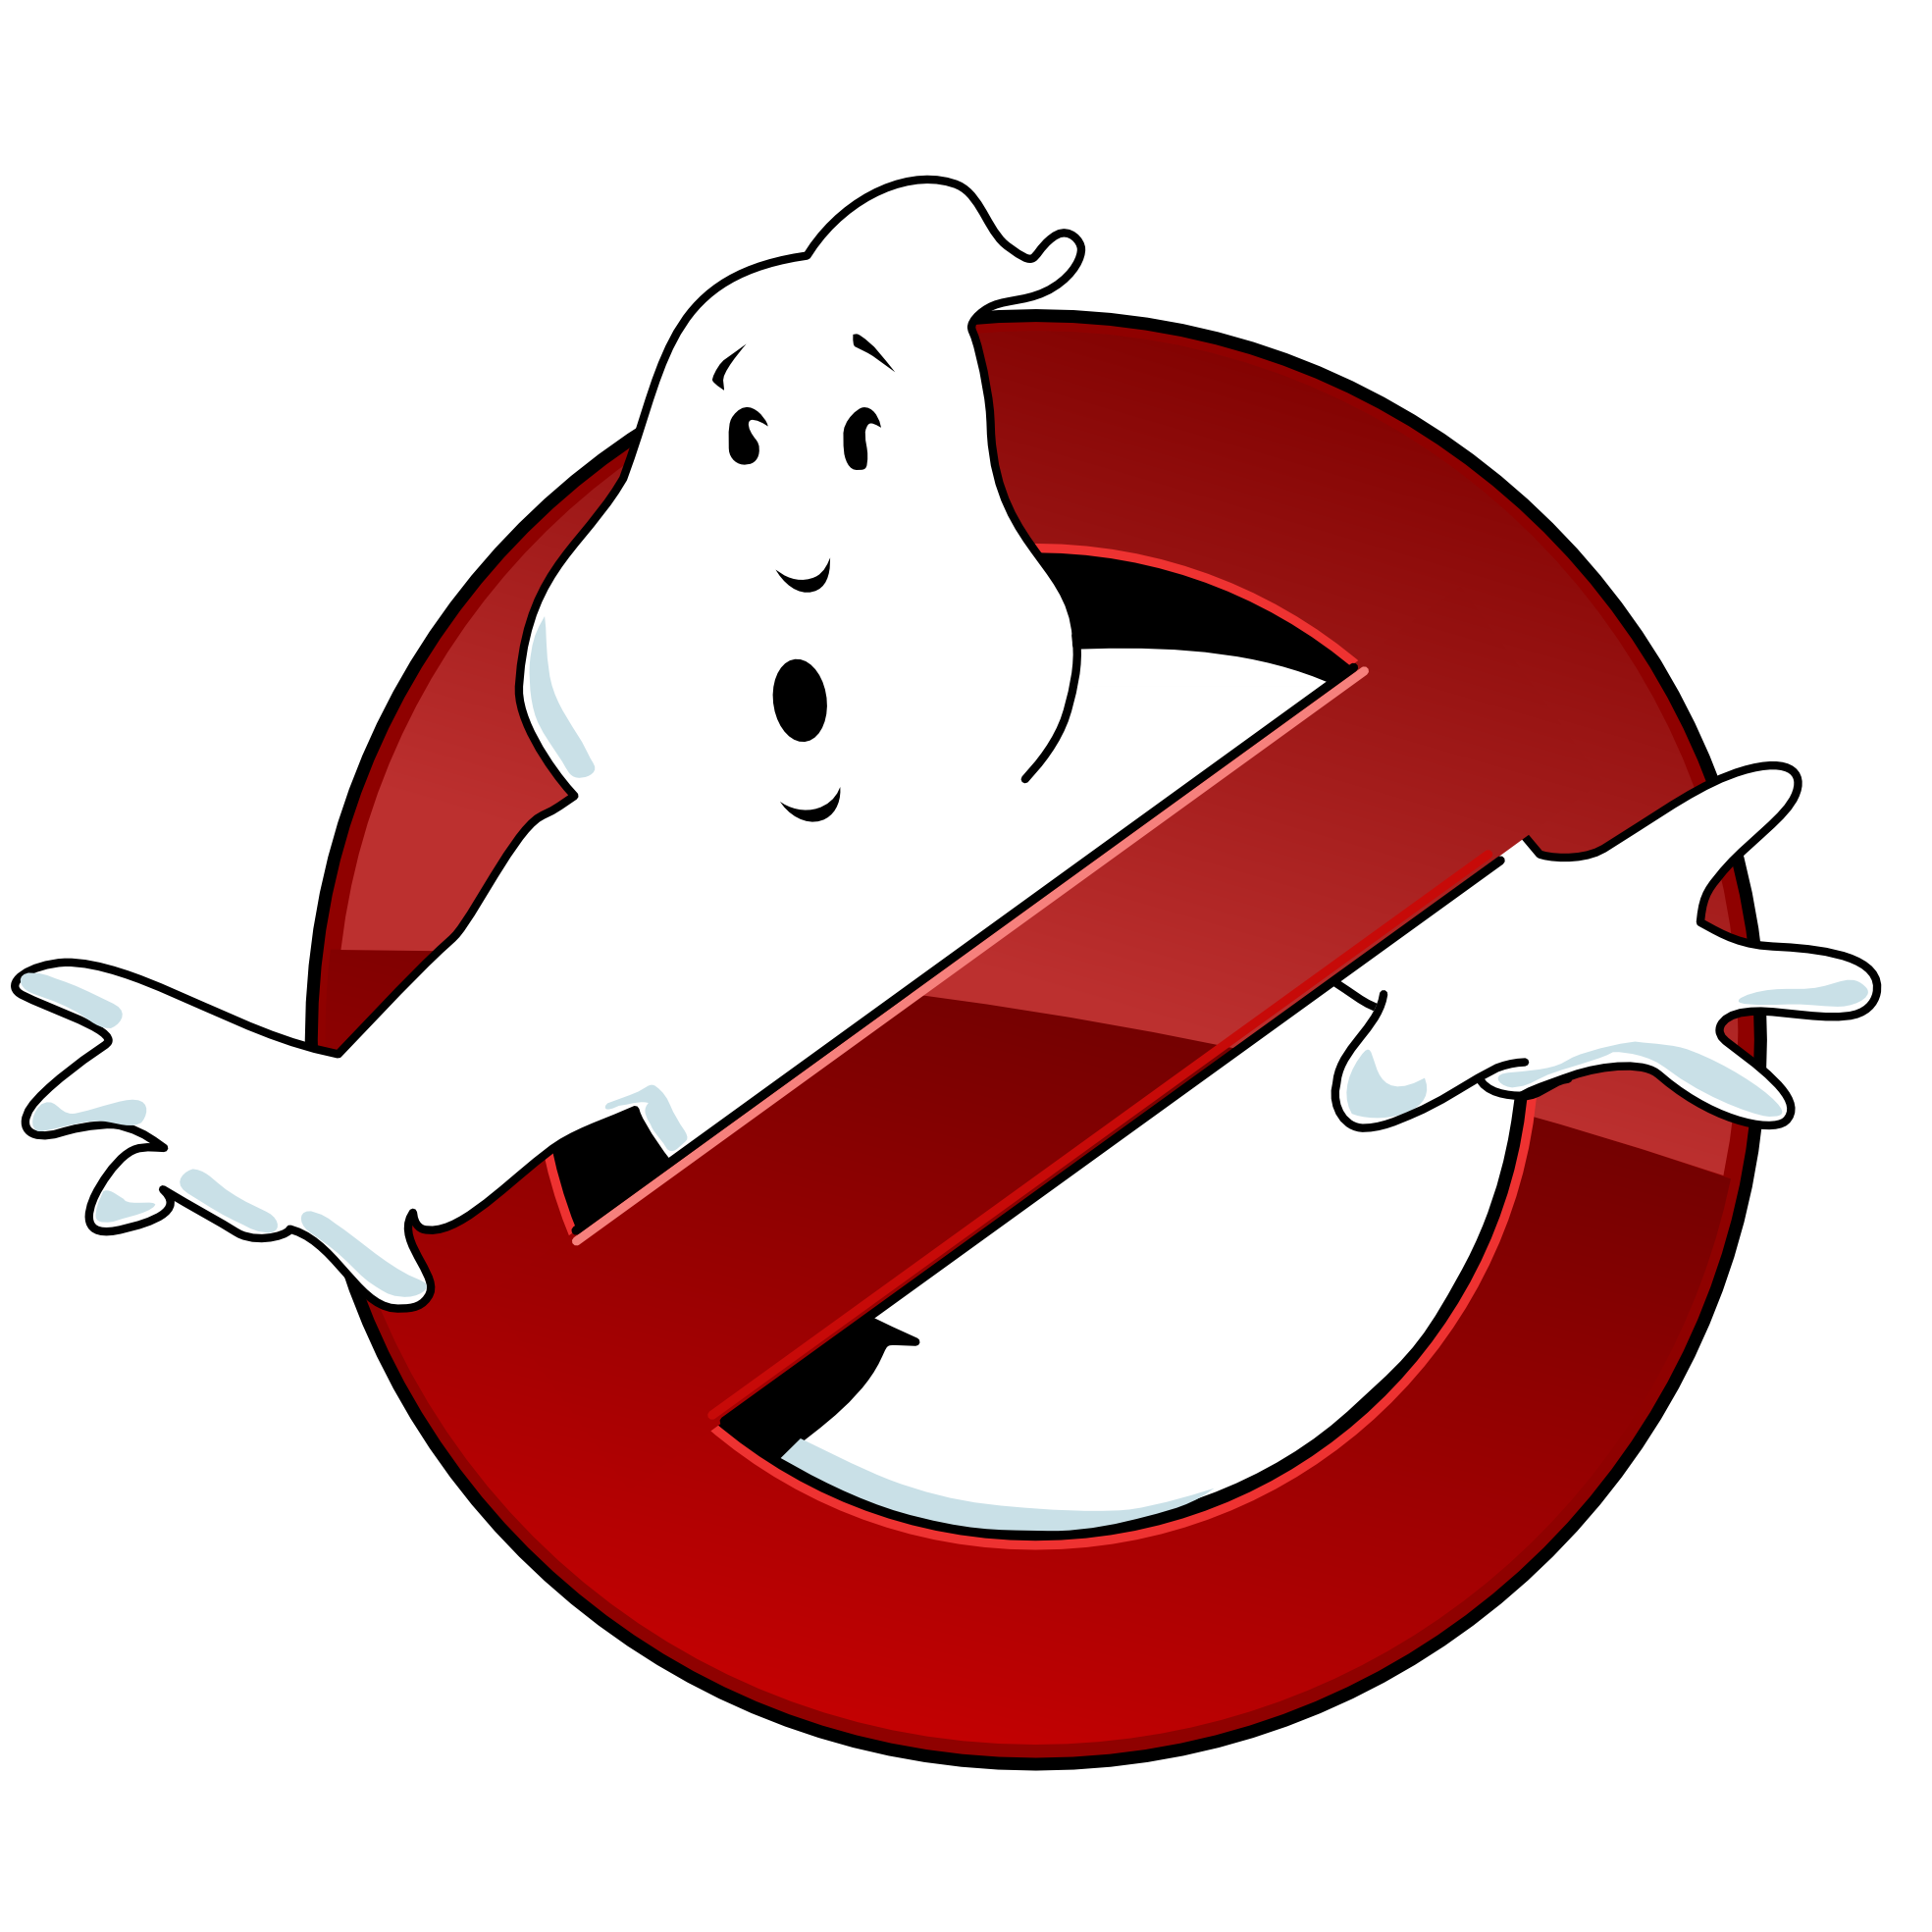 Halloween Ghost PNG Image